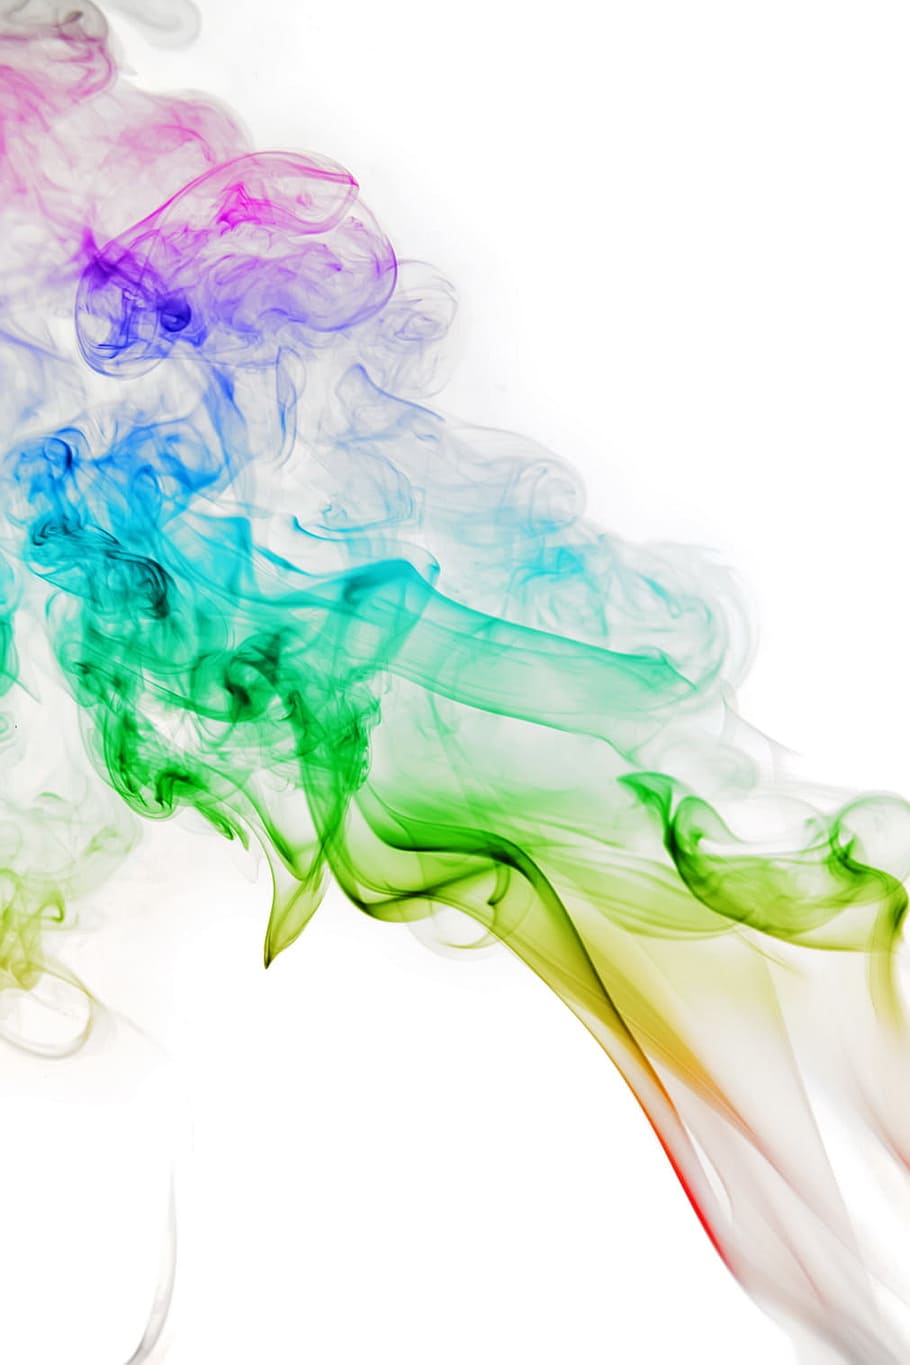 abstract, abstraction, addiction, air, aroma, aromatherapy, backdrop, background, beauty, color